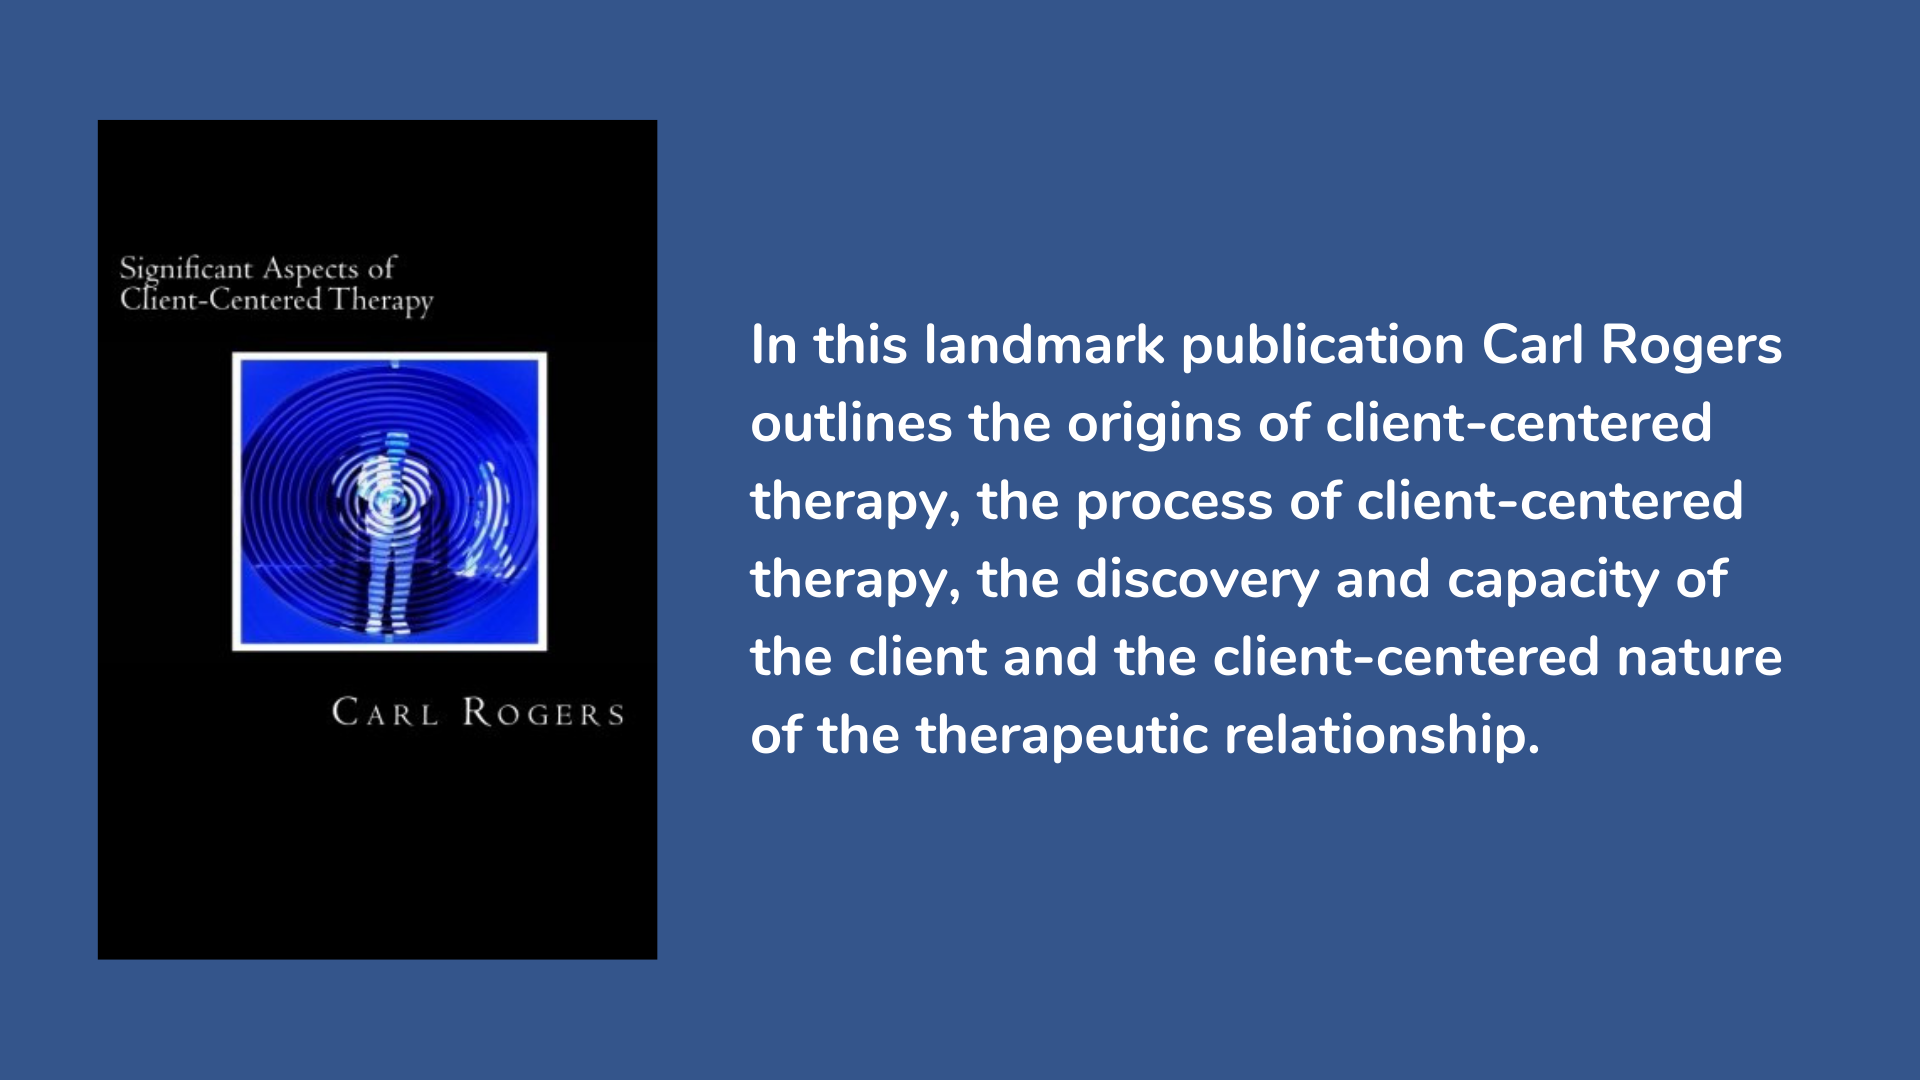 Significant Aspects of Client-Centered Therapy by Carl Rogers, book cover and description.